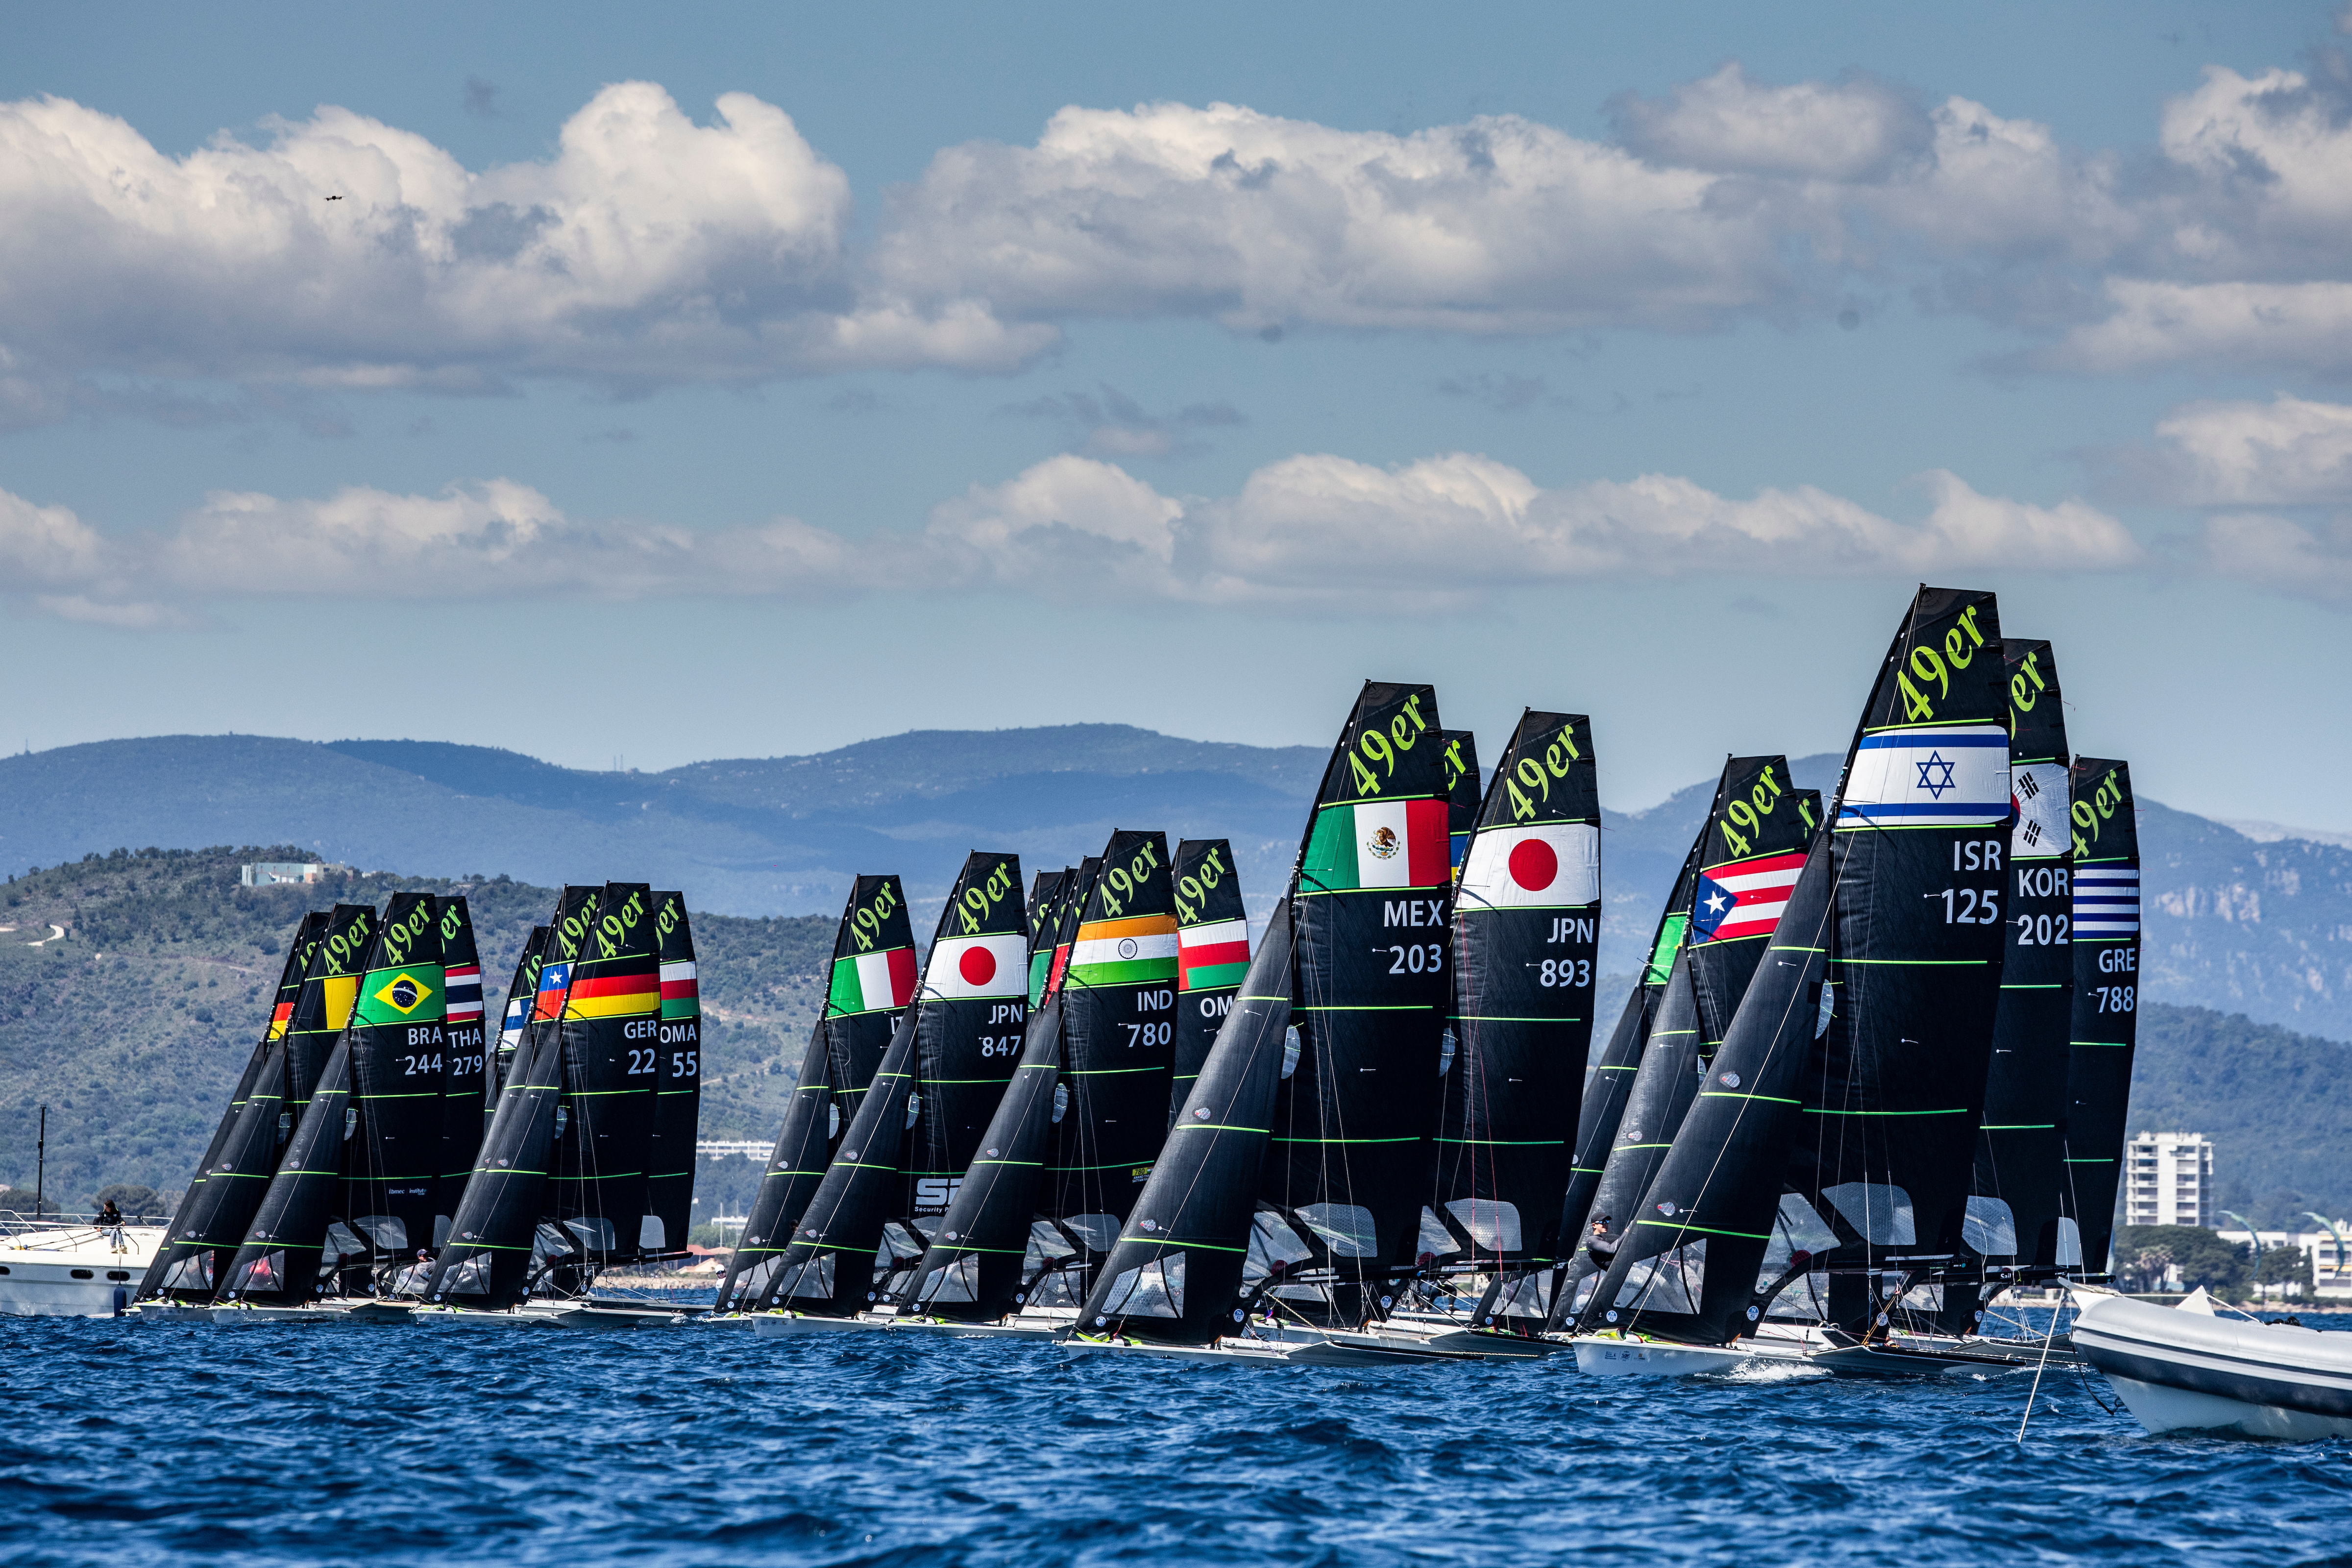  Olympic Classes  Last Chance Regatta  Hyeres FRA  Day 1  Elena Lengwiler SUI auf OlympiaKurs